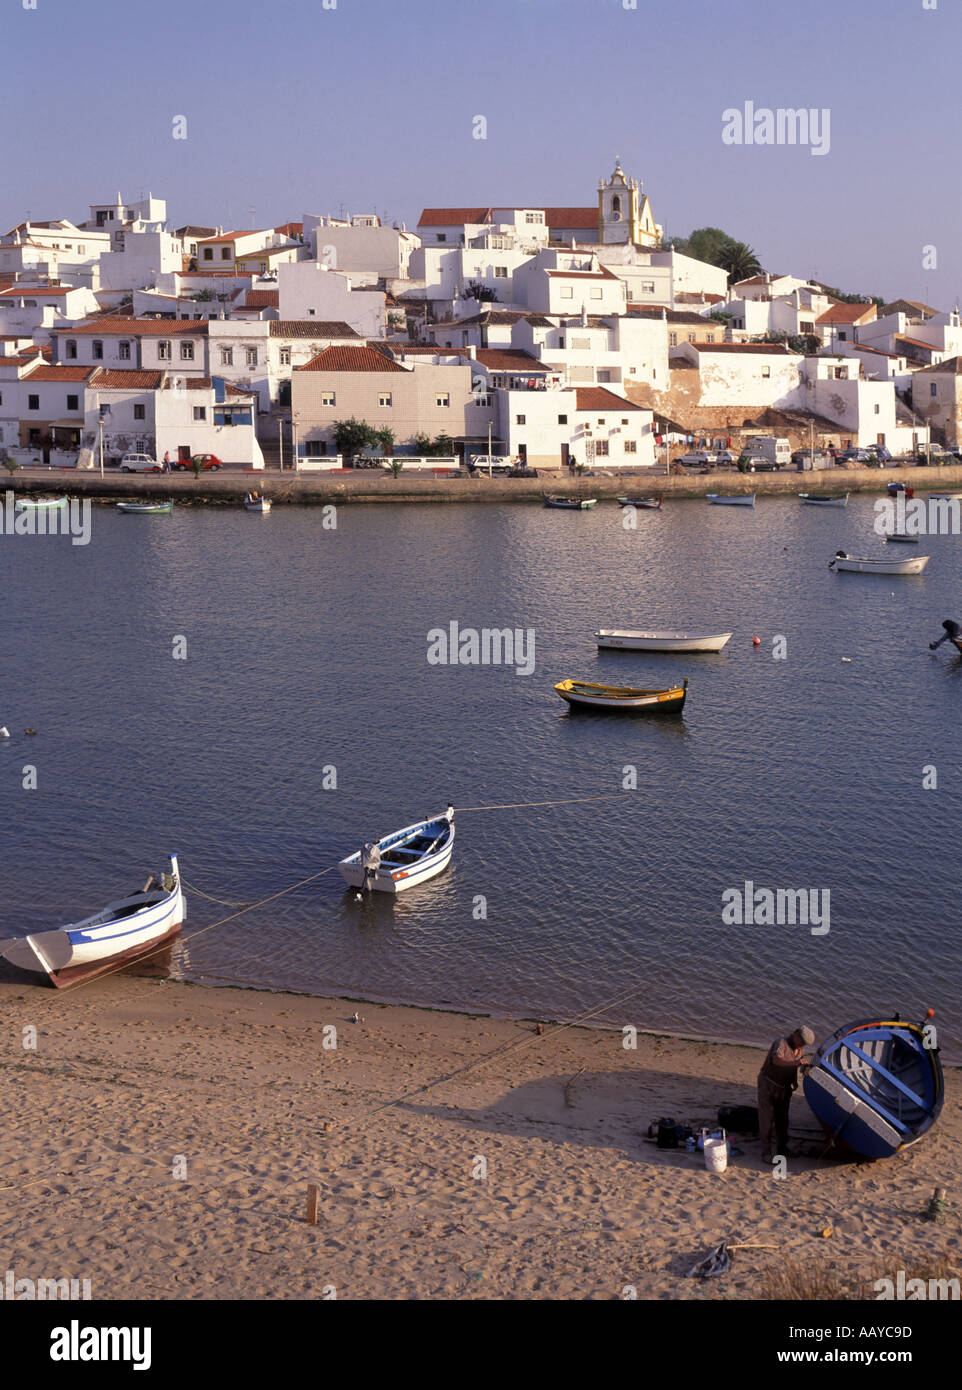 Algarve Ferragudo village beyond beach and moored fishing boat in harbour Stock Photo